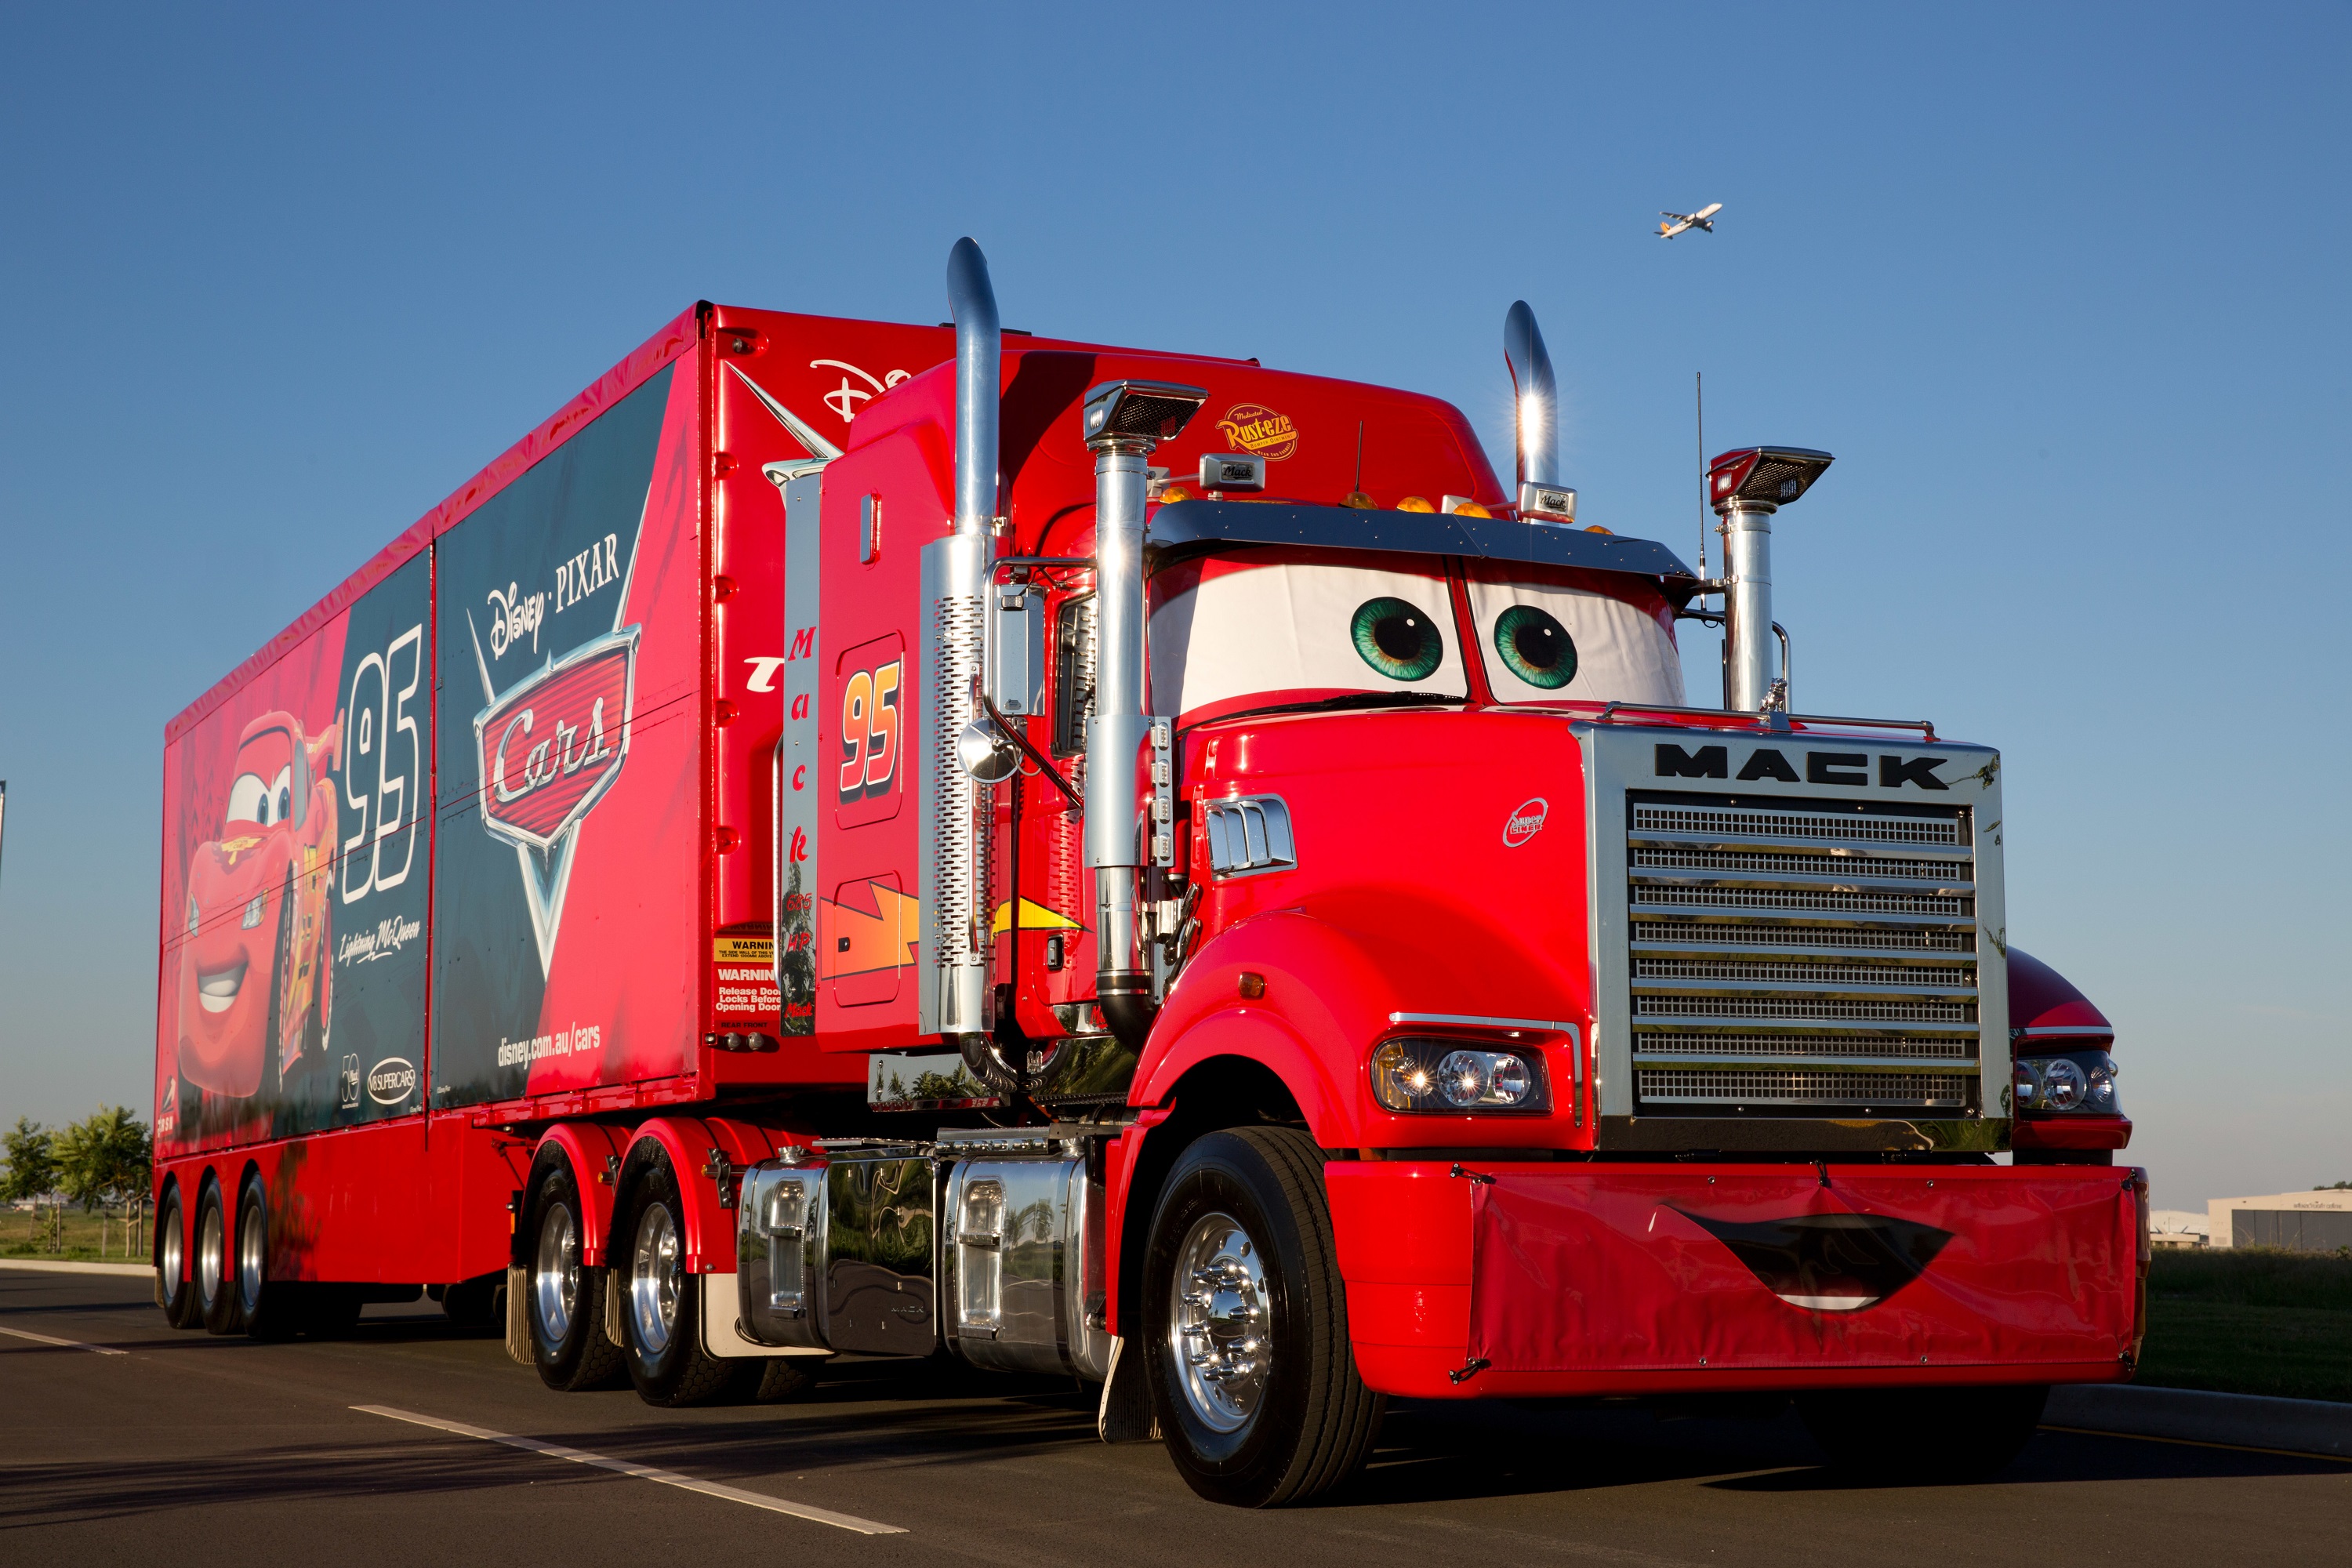 Disney/Pixar Cars Truck Tour is back to bring more high